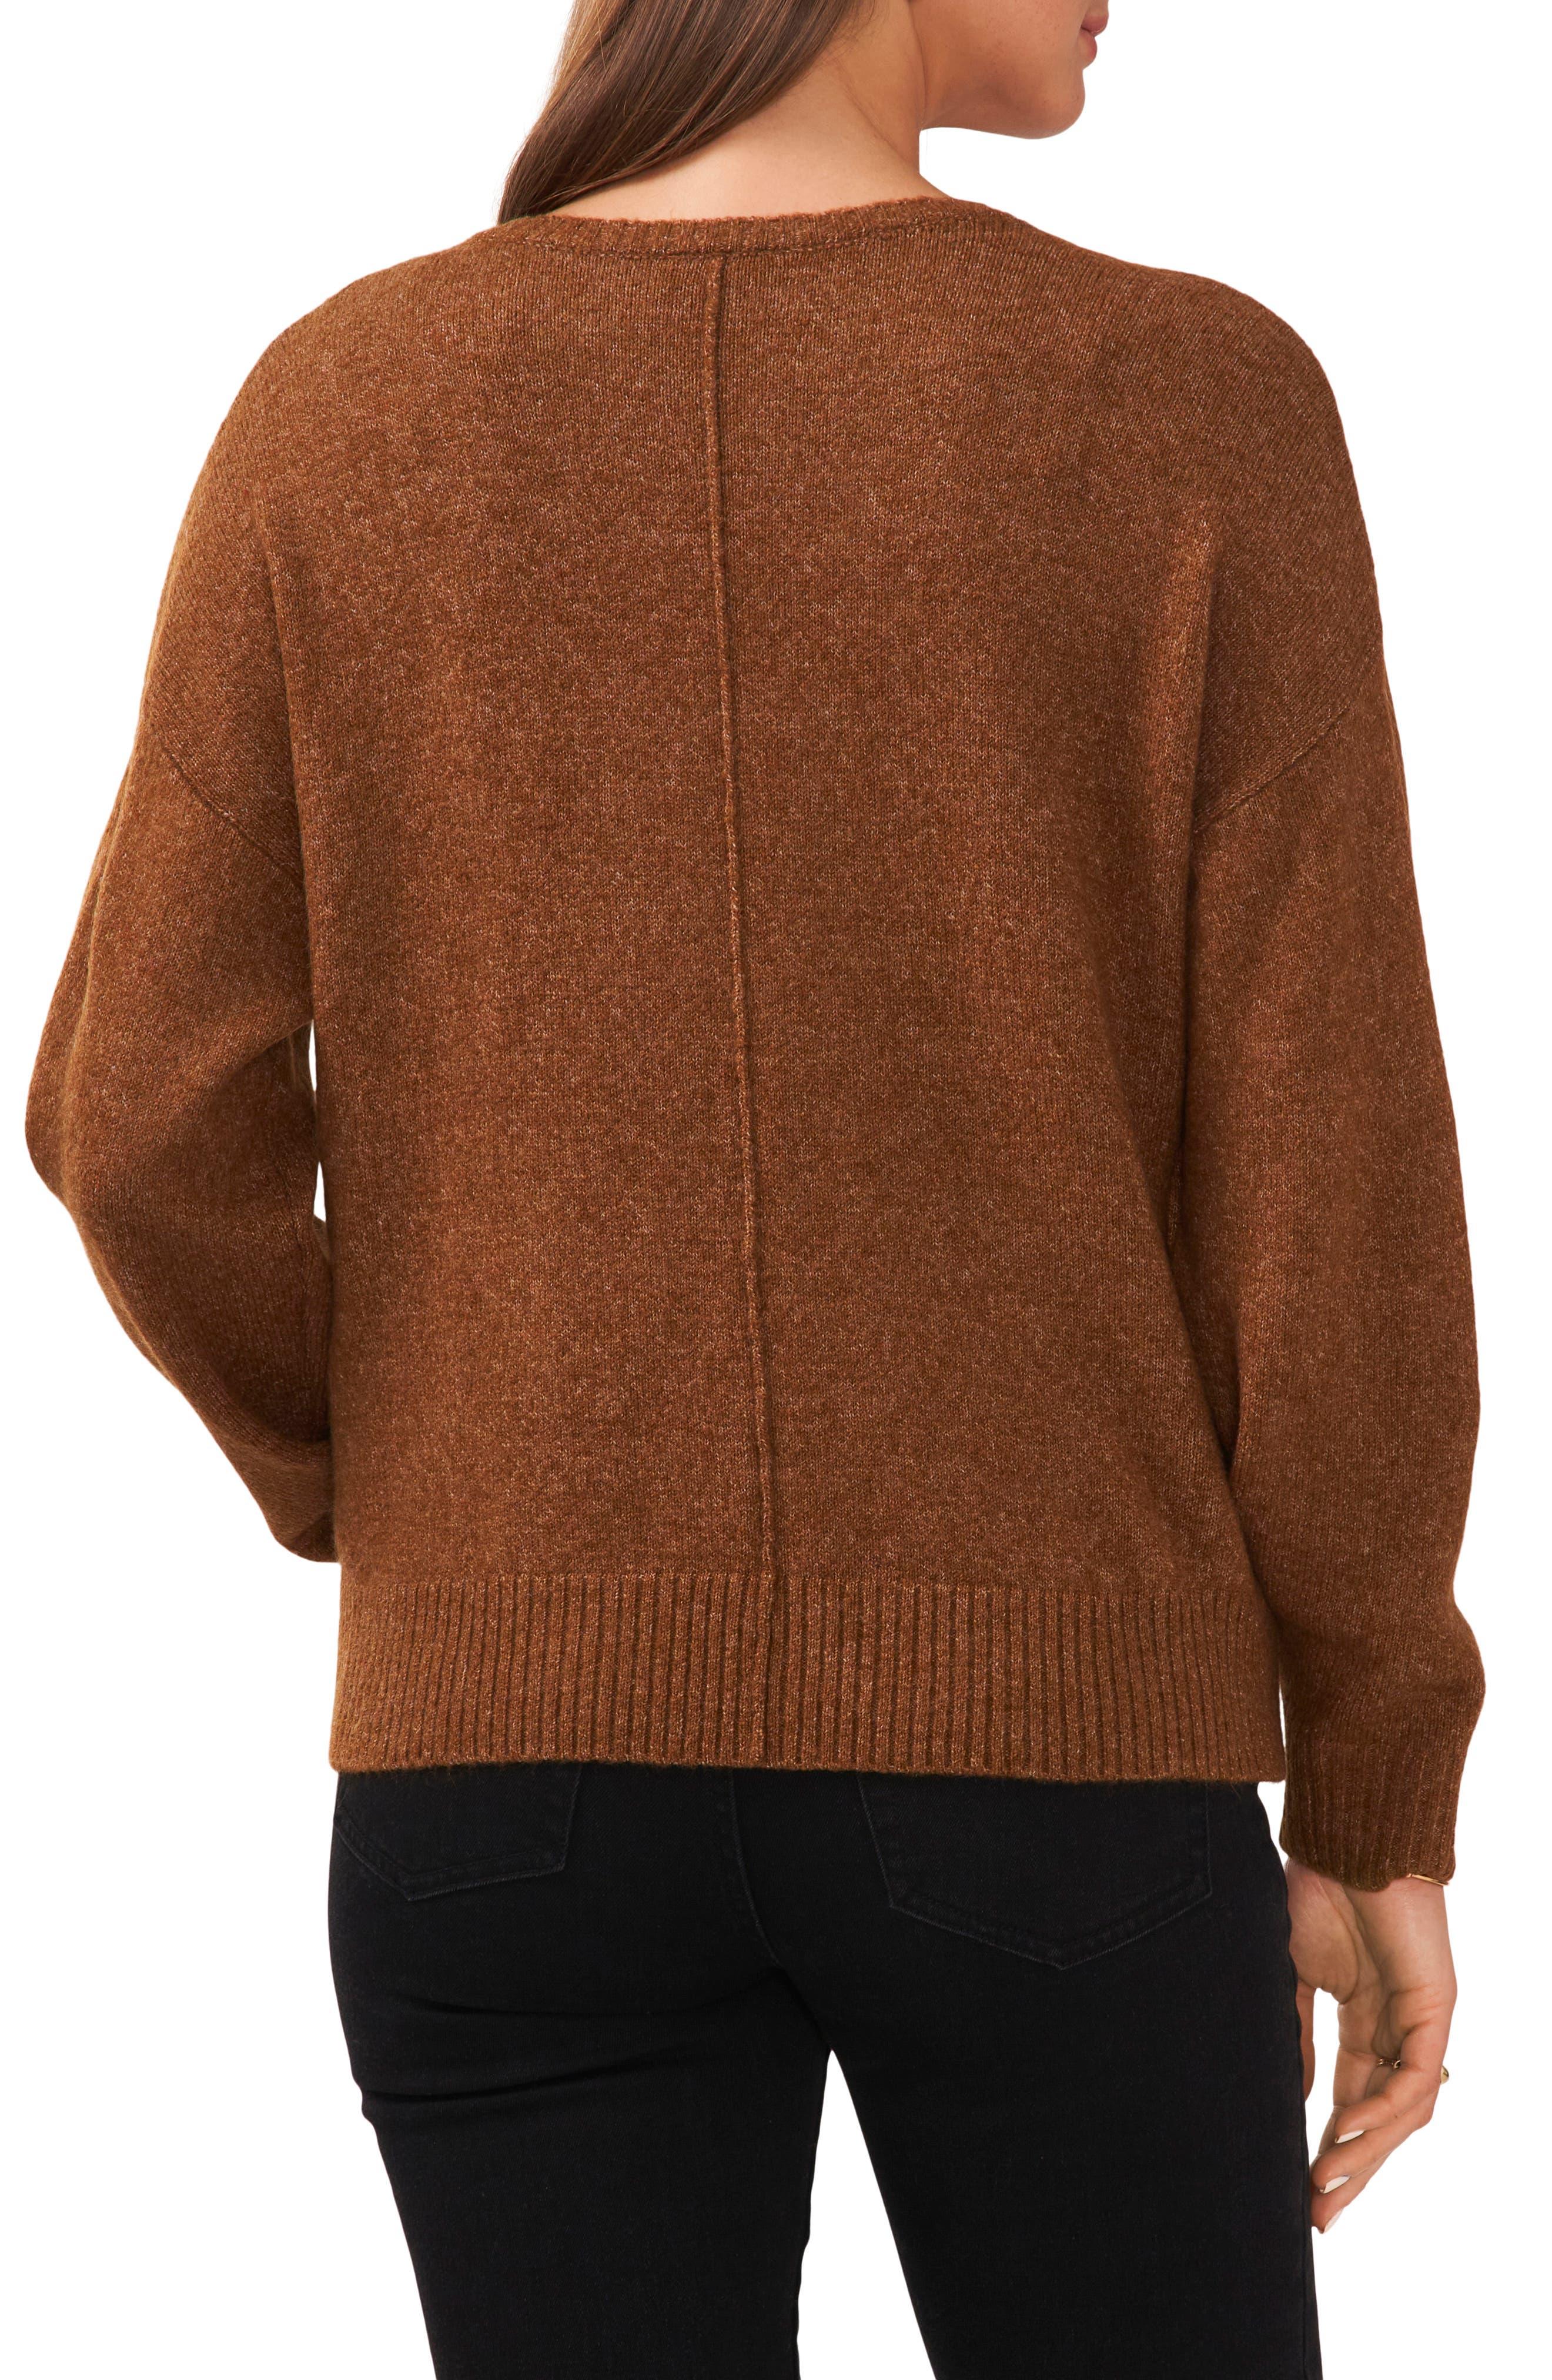 Vince Camuto Cozy Seam Sweater in Brown